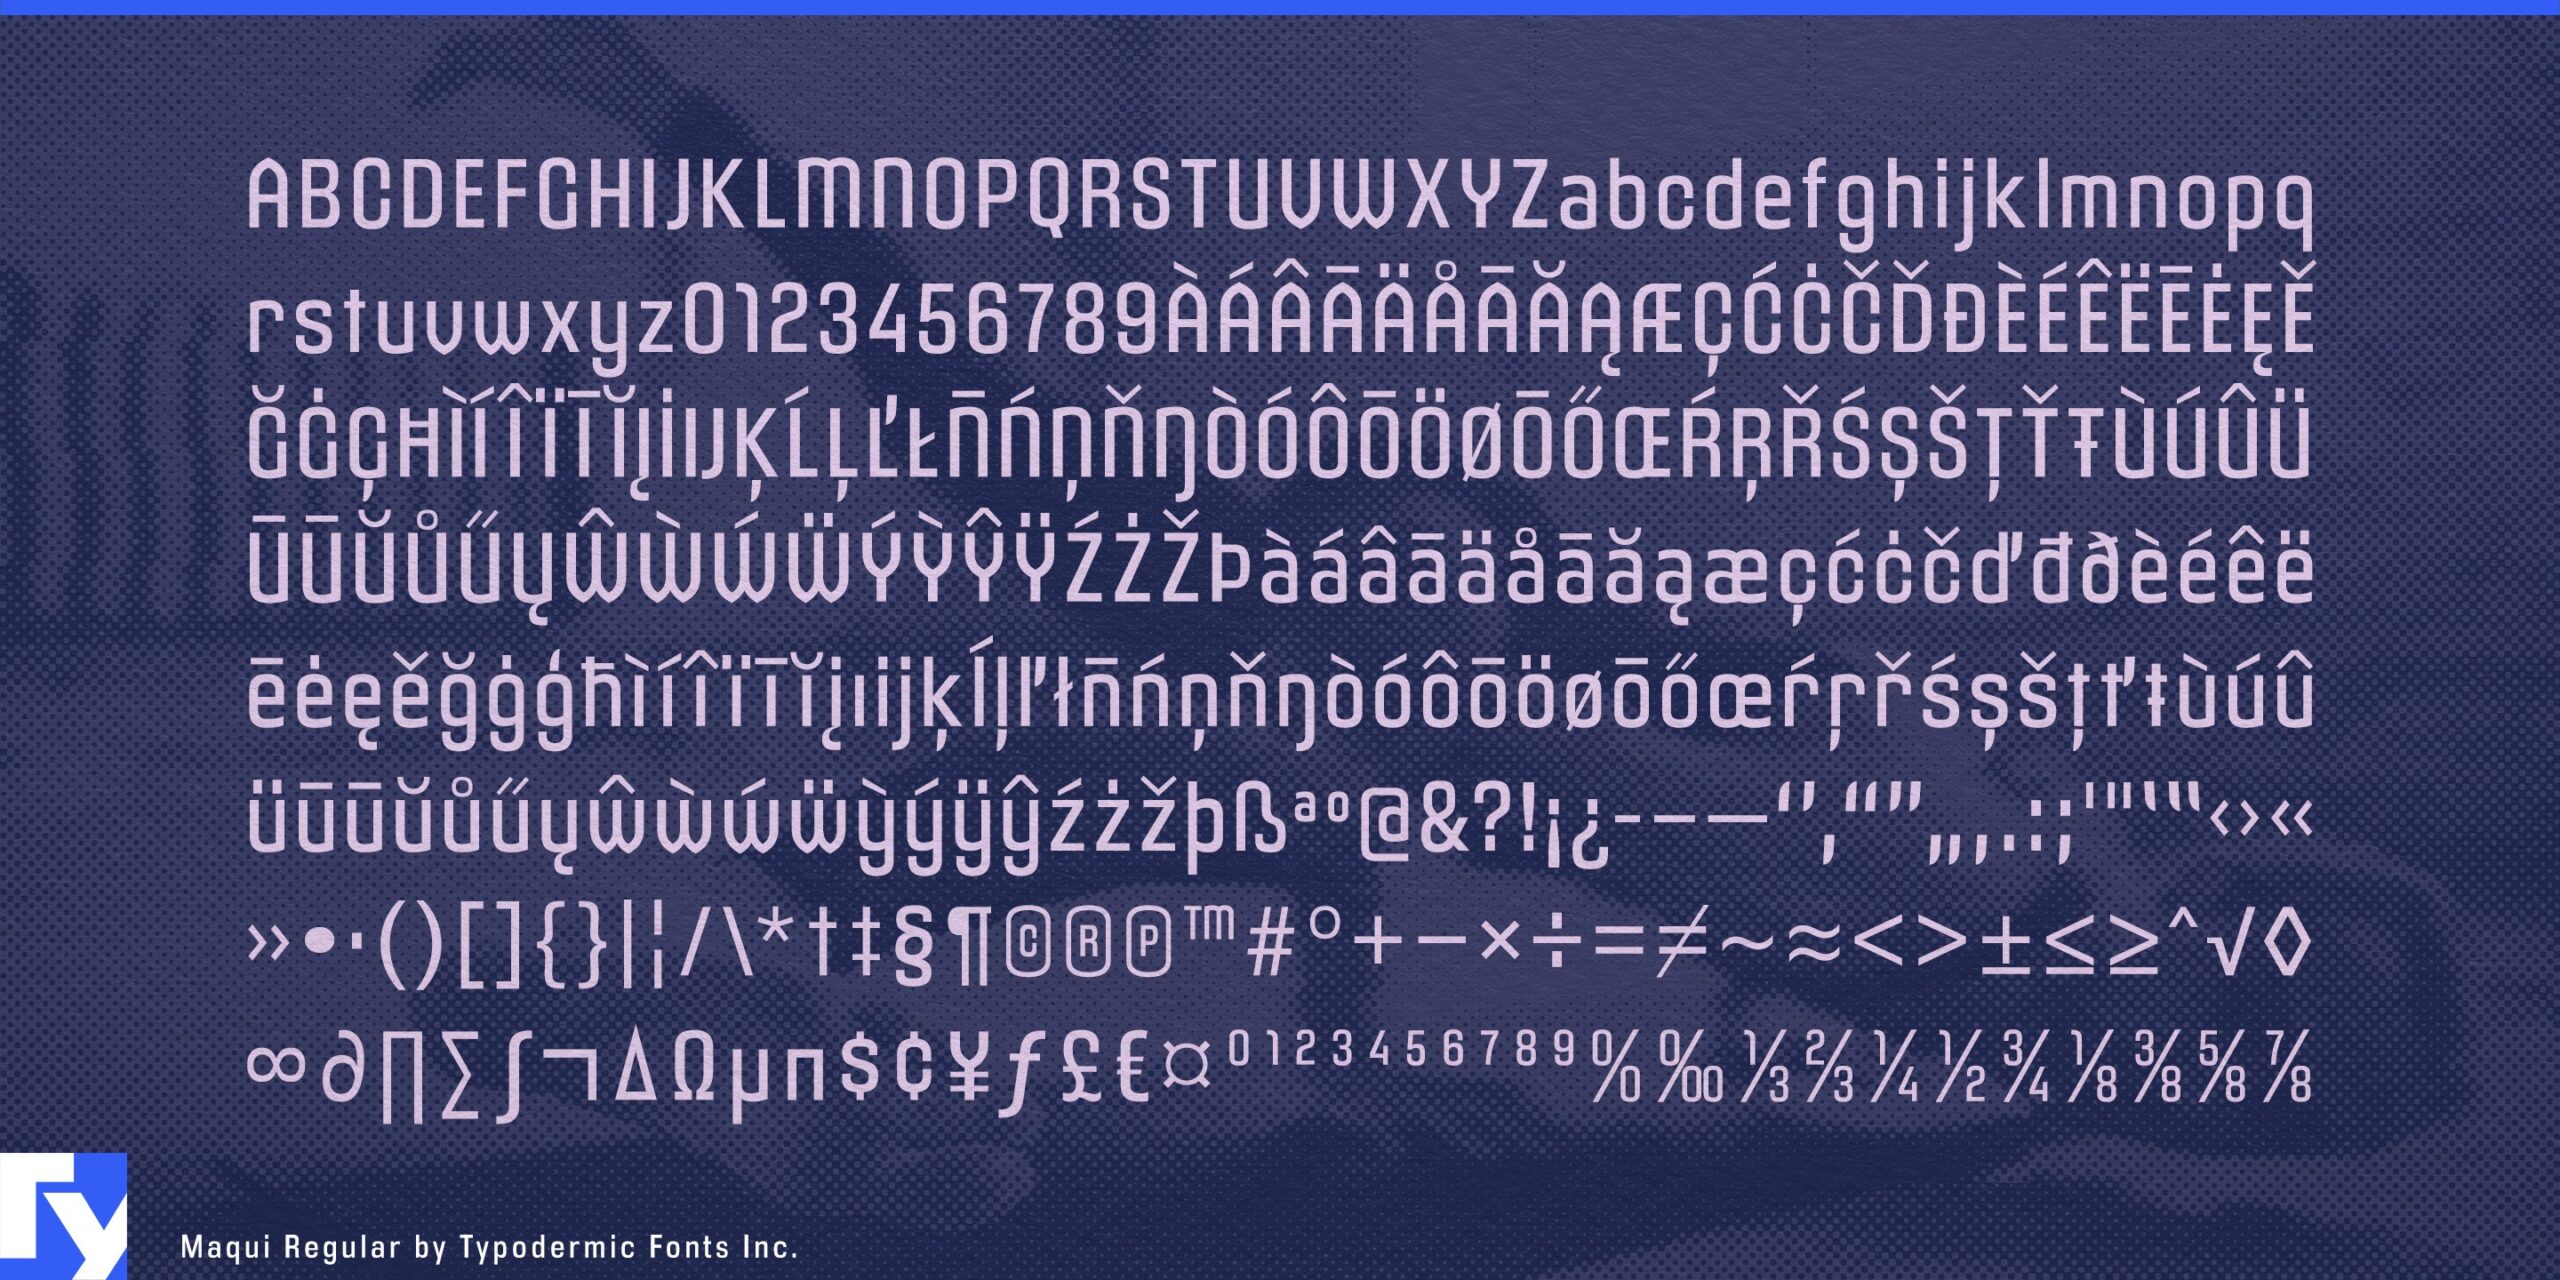 Cathedral-Themed Peaks: Maqui Typeface in Action